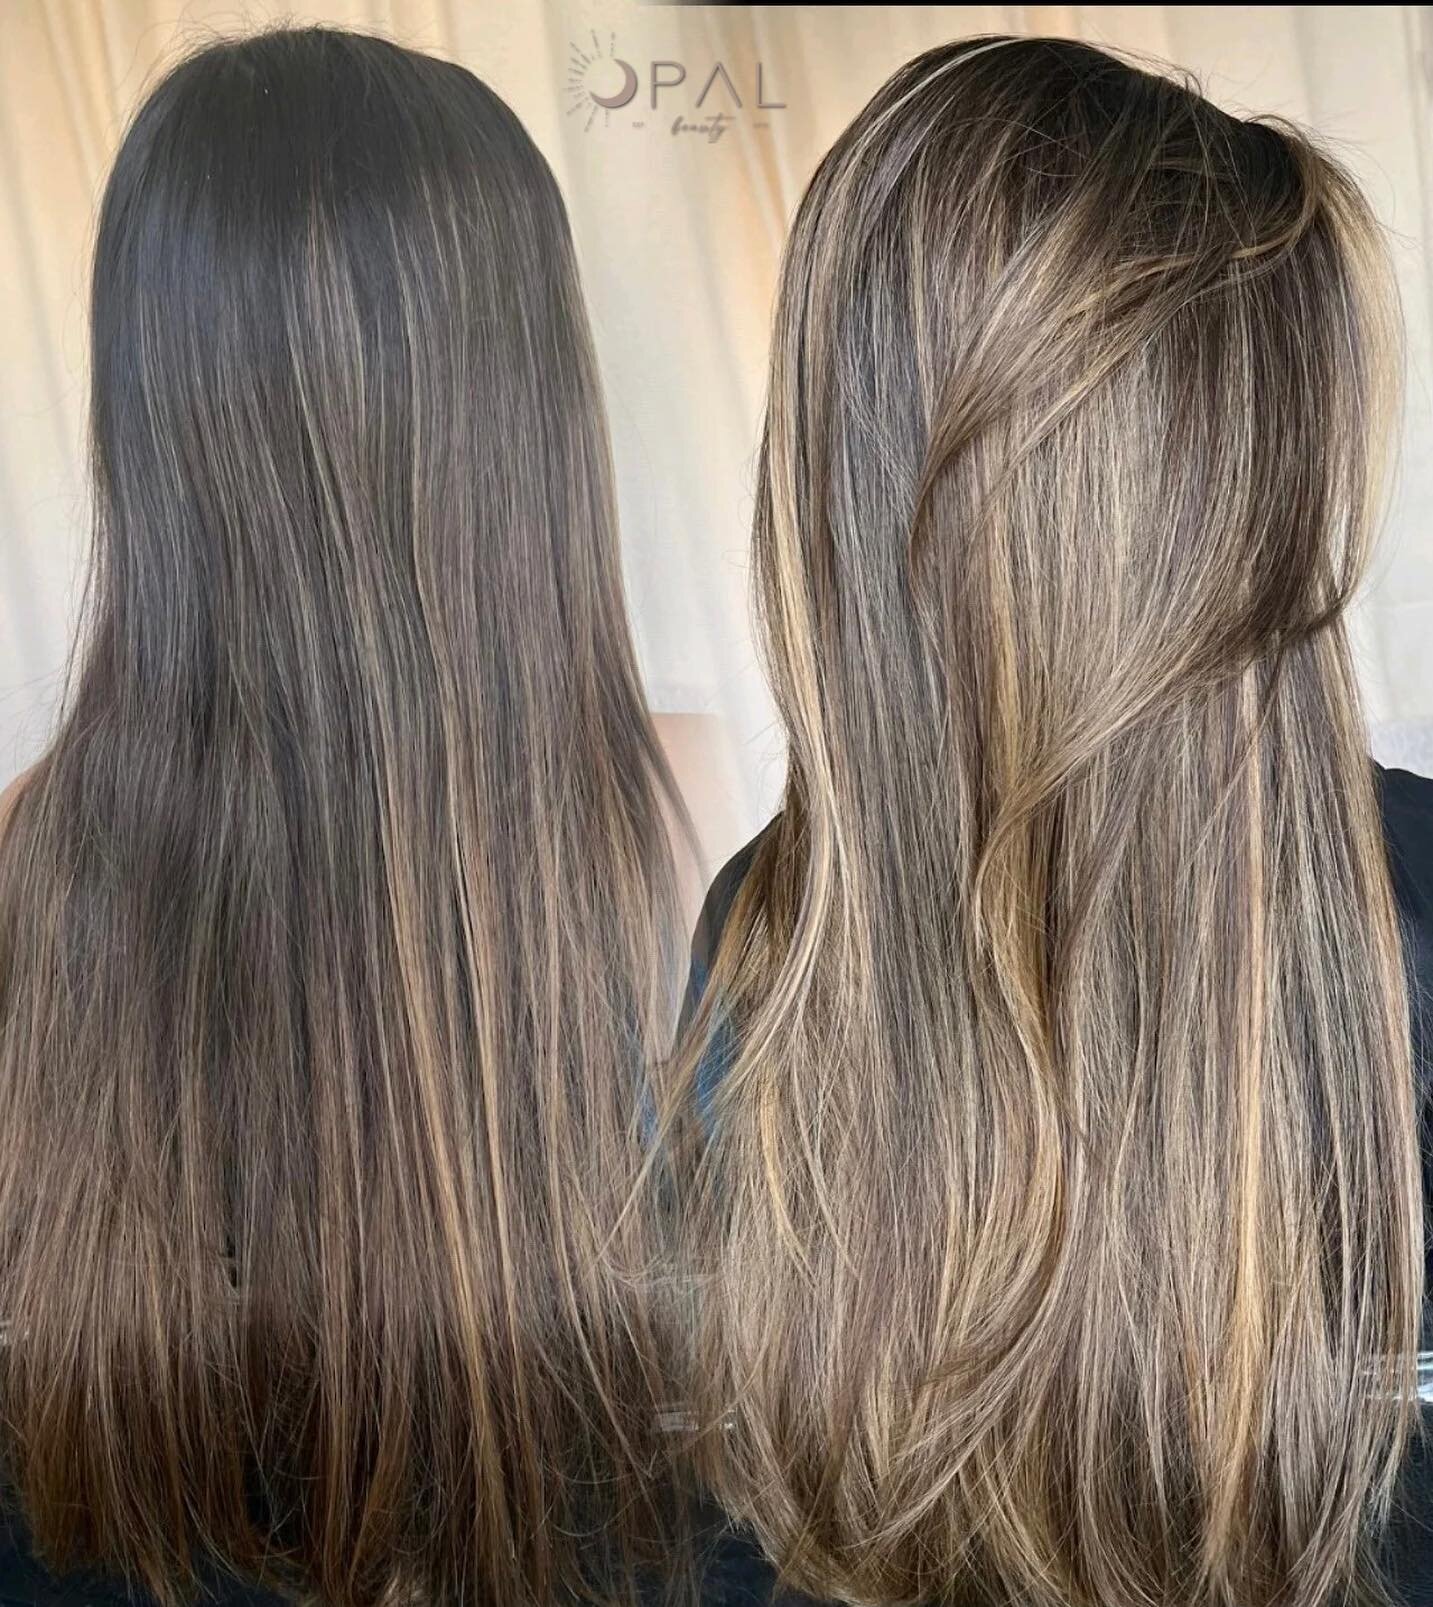 Out with the old and in with the new ✨ 

Opal Beauty strives to make everyone feel beautiful because we know you deserve it! 

Check out this stunning hair transformation and see for yourself the magic we can create! 🫶 

#Opalbeautyorlando #Hairtran